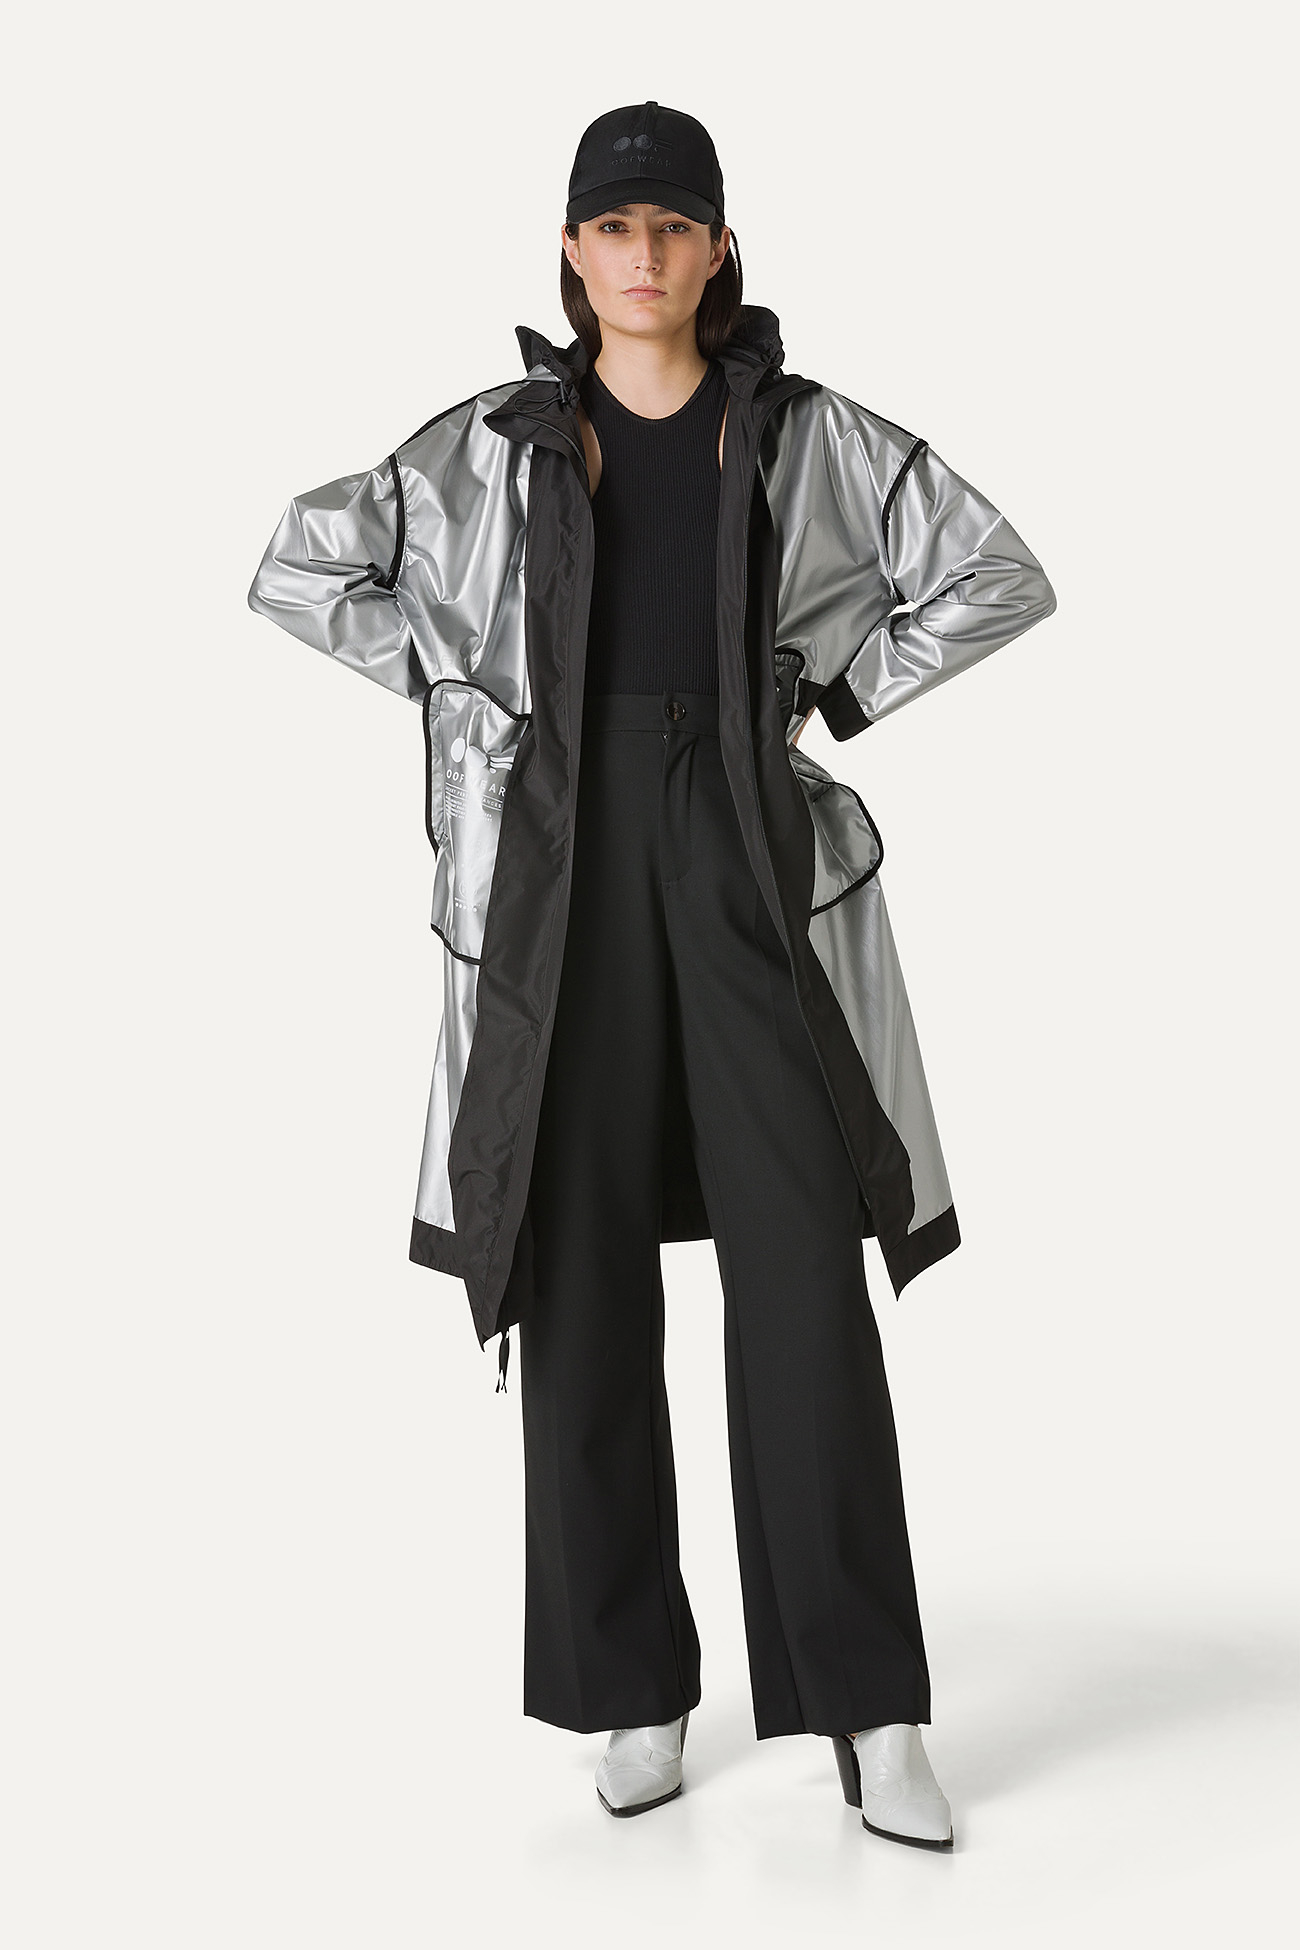 LONG NYLON JACKET WITH SILVER LINING 9216 - BLACK - OOF WEAR